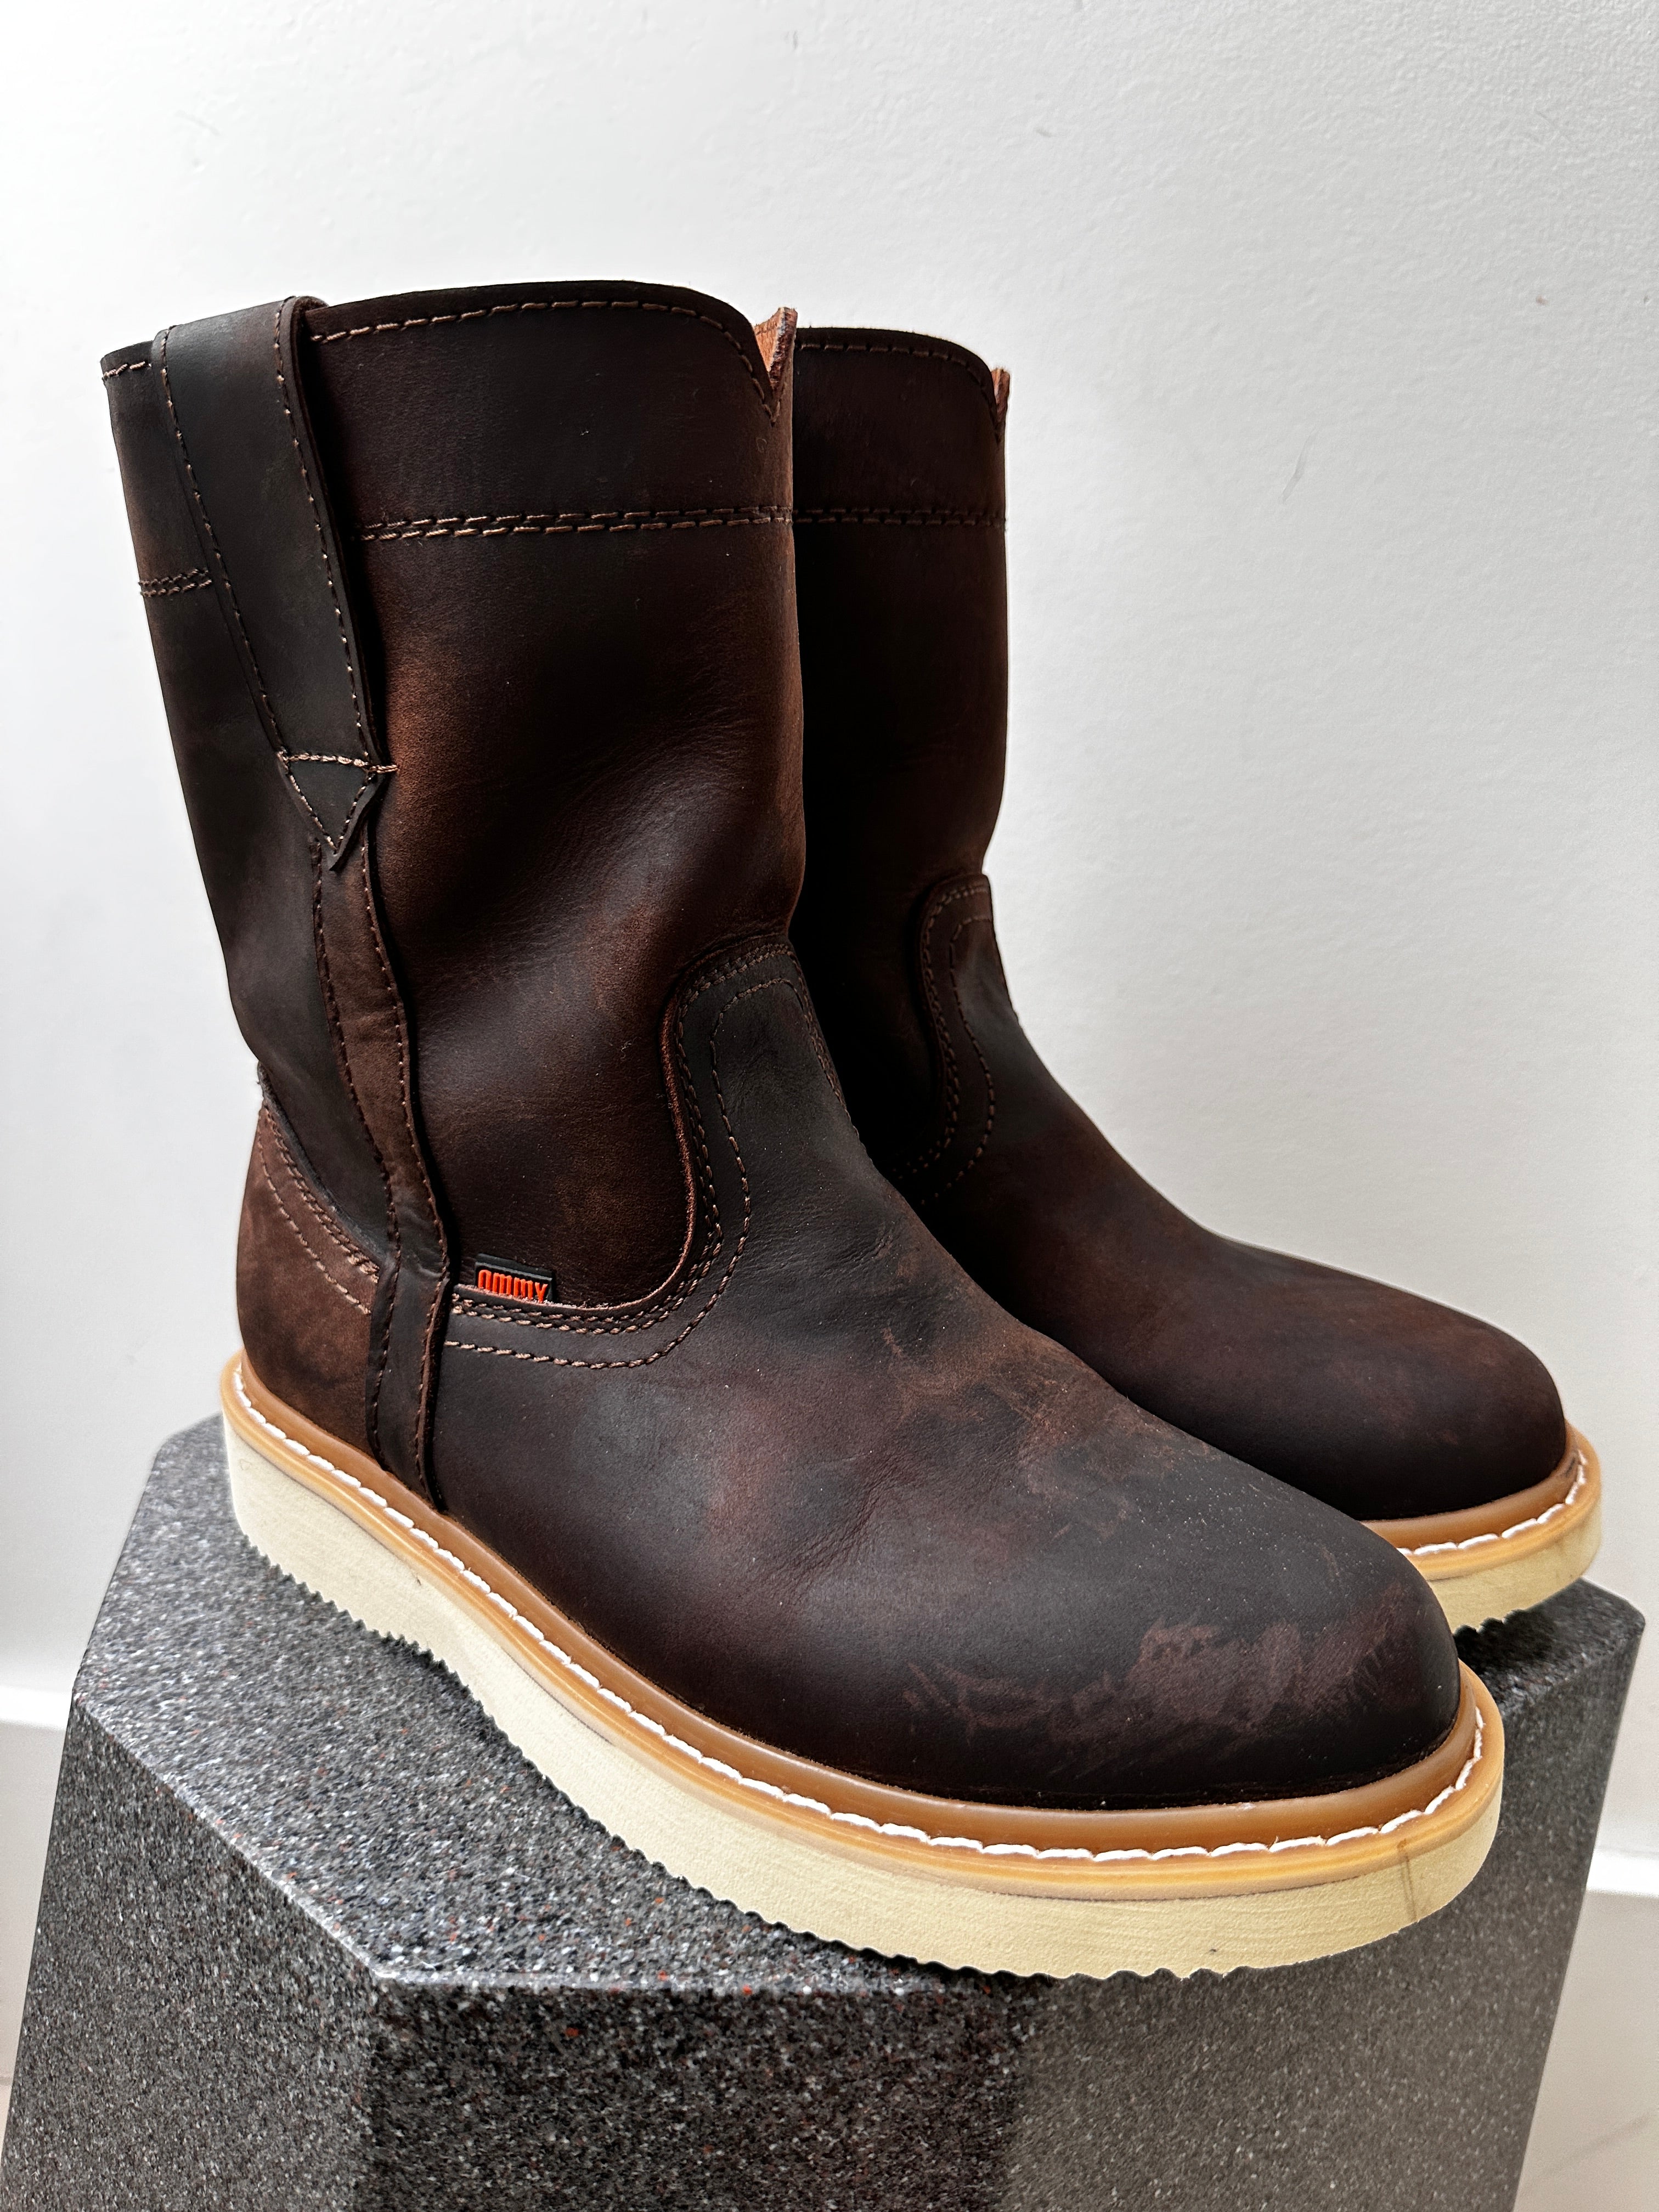 Future Nomads Shoes Mexican Work Boots Brown